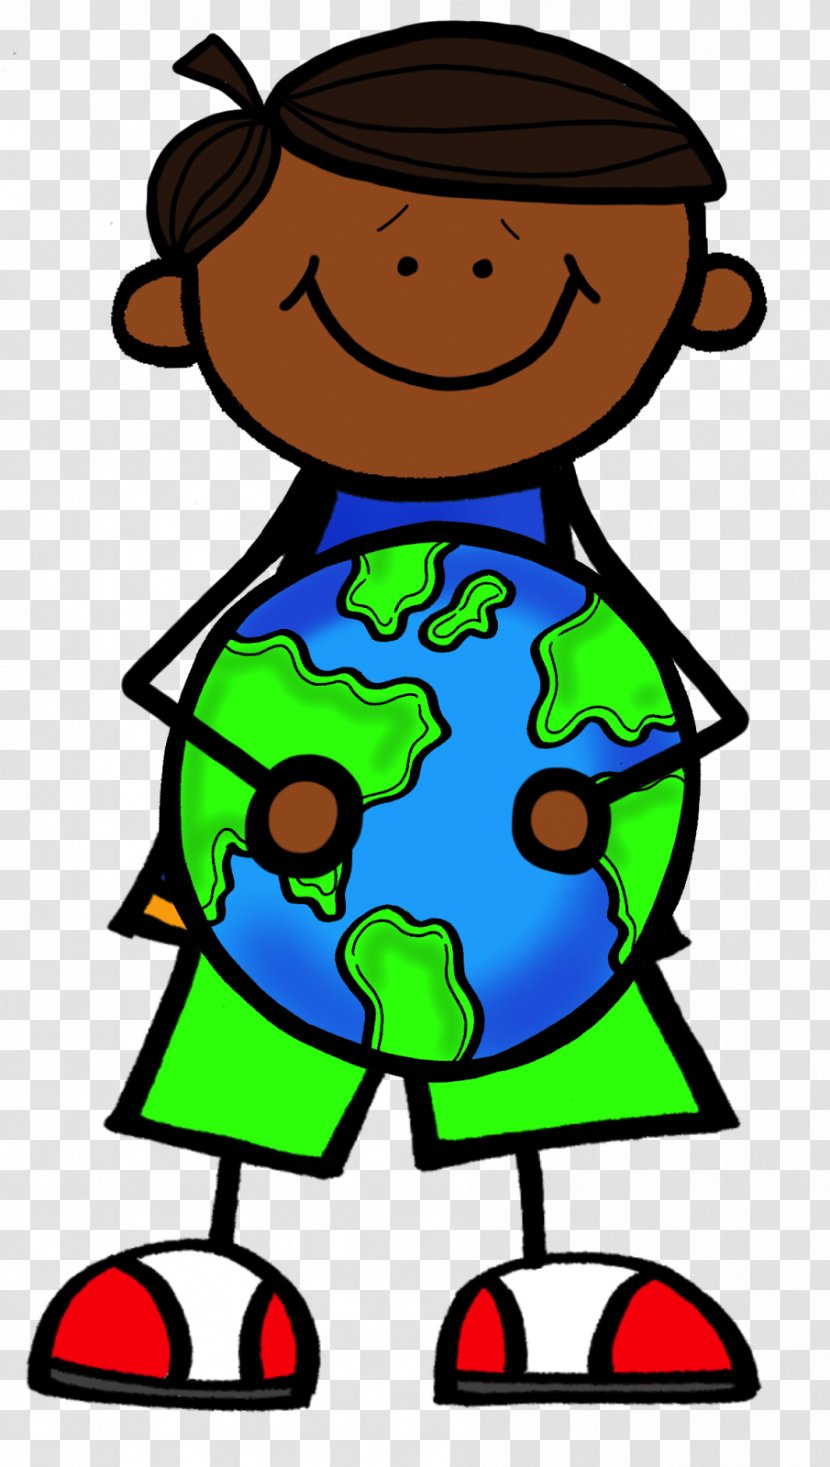 She Subject Pronoun They - Human Behavior - Earth Day Transparent PNG